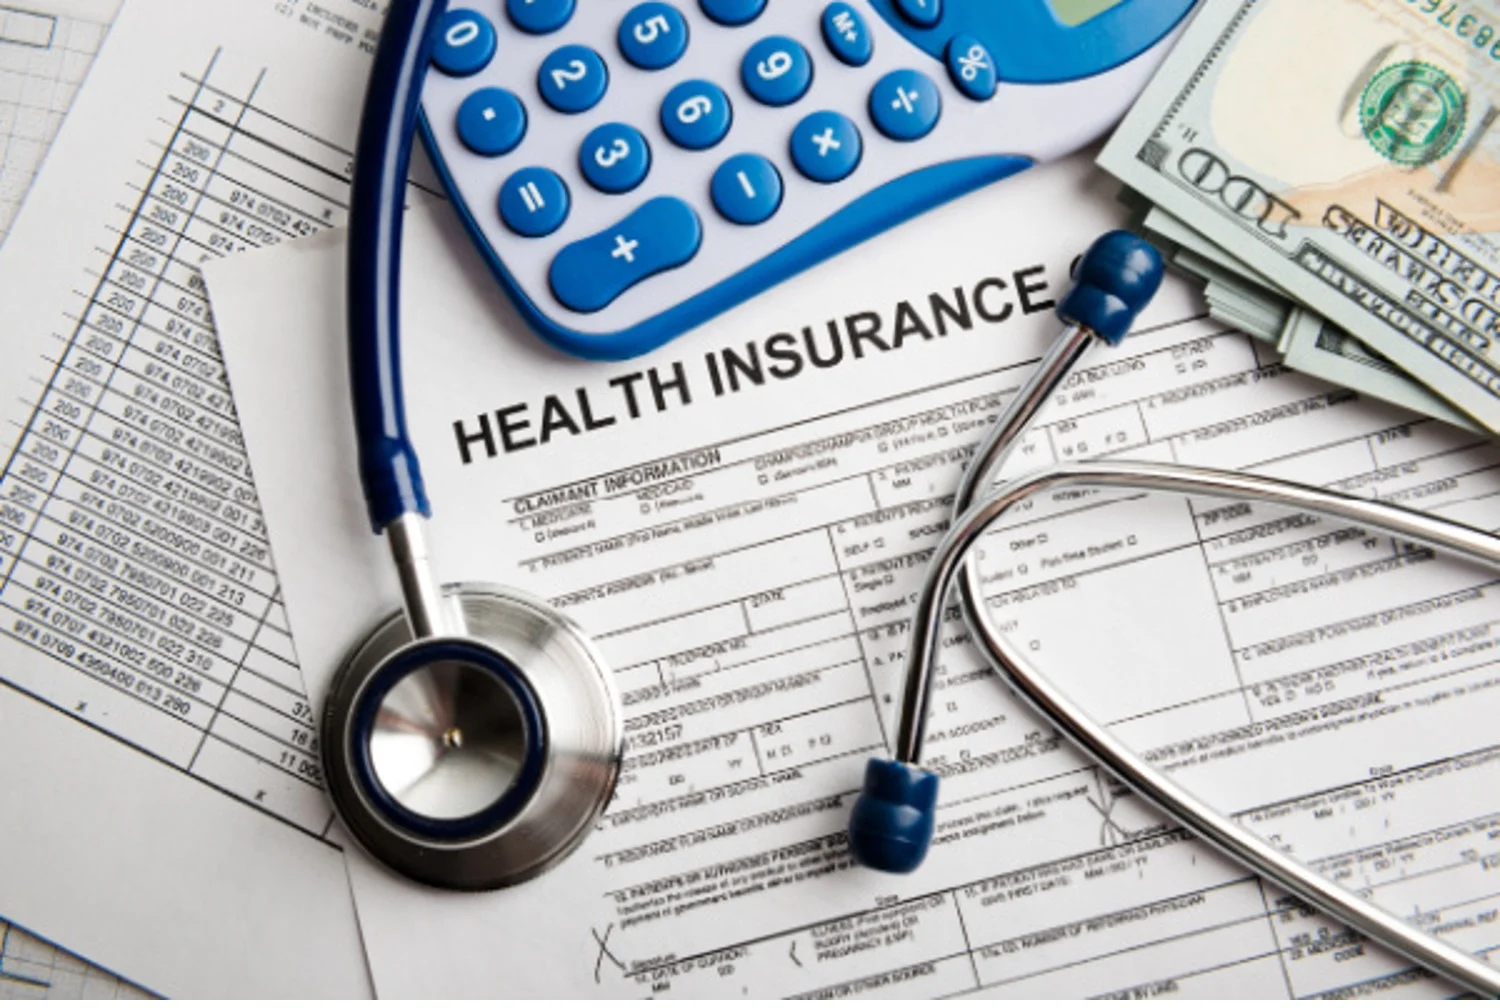 Document that says “HEALTH INSURANCE” covered by stethoscope, calculator, and pile of $100 bills